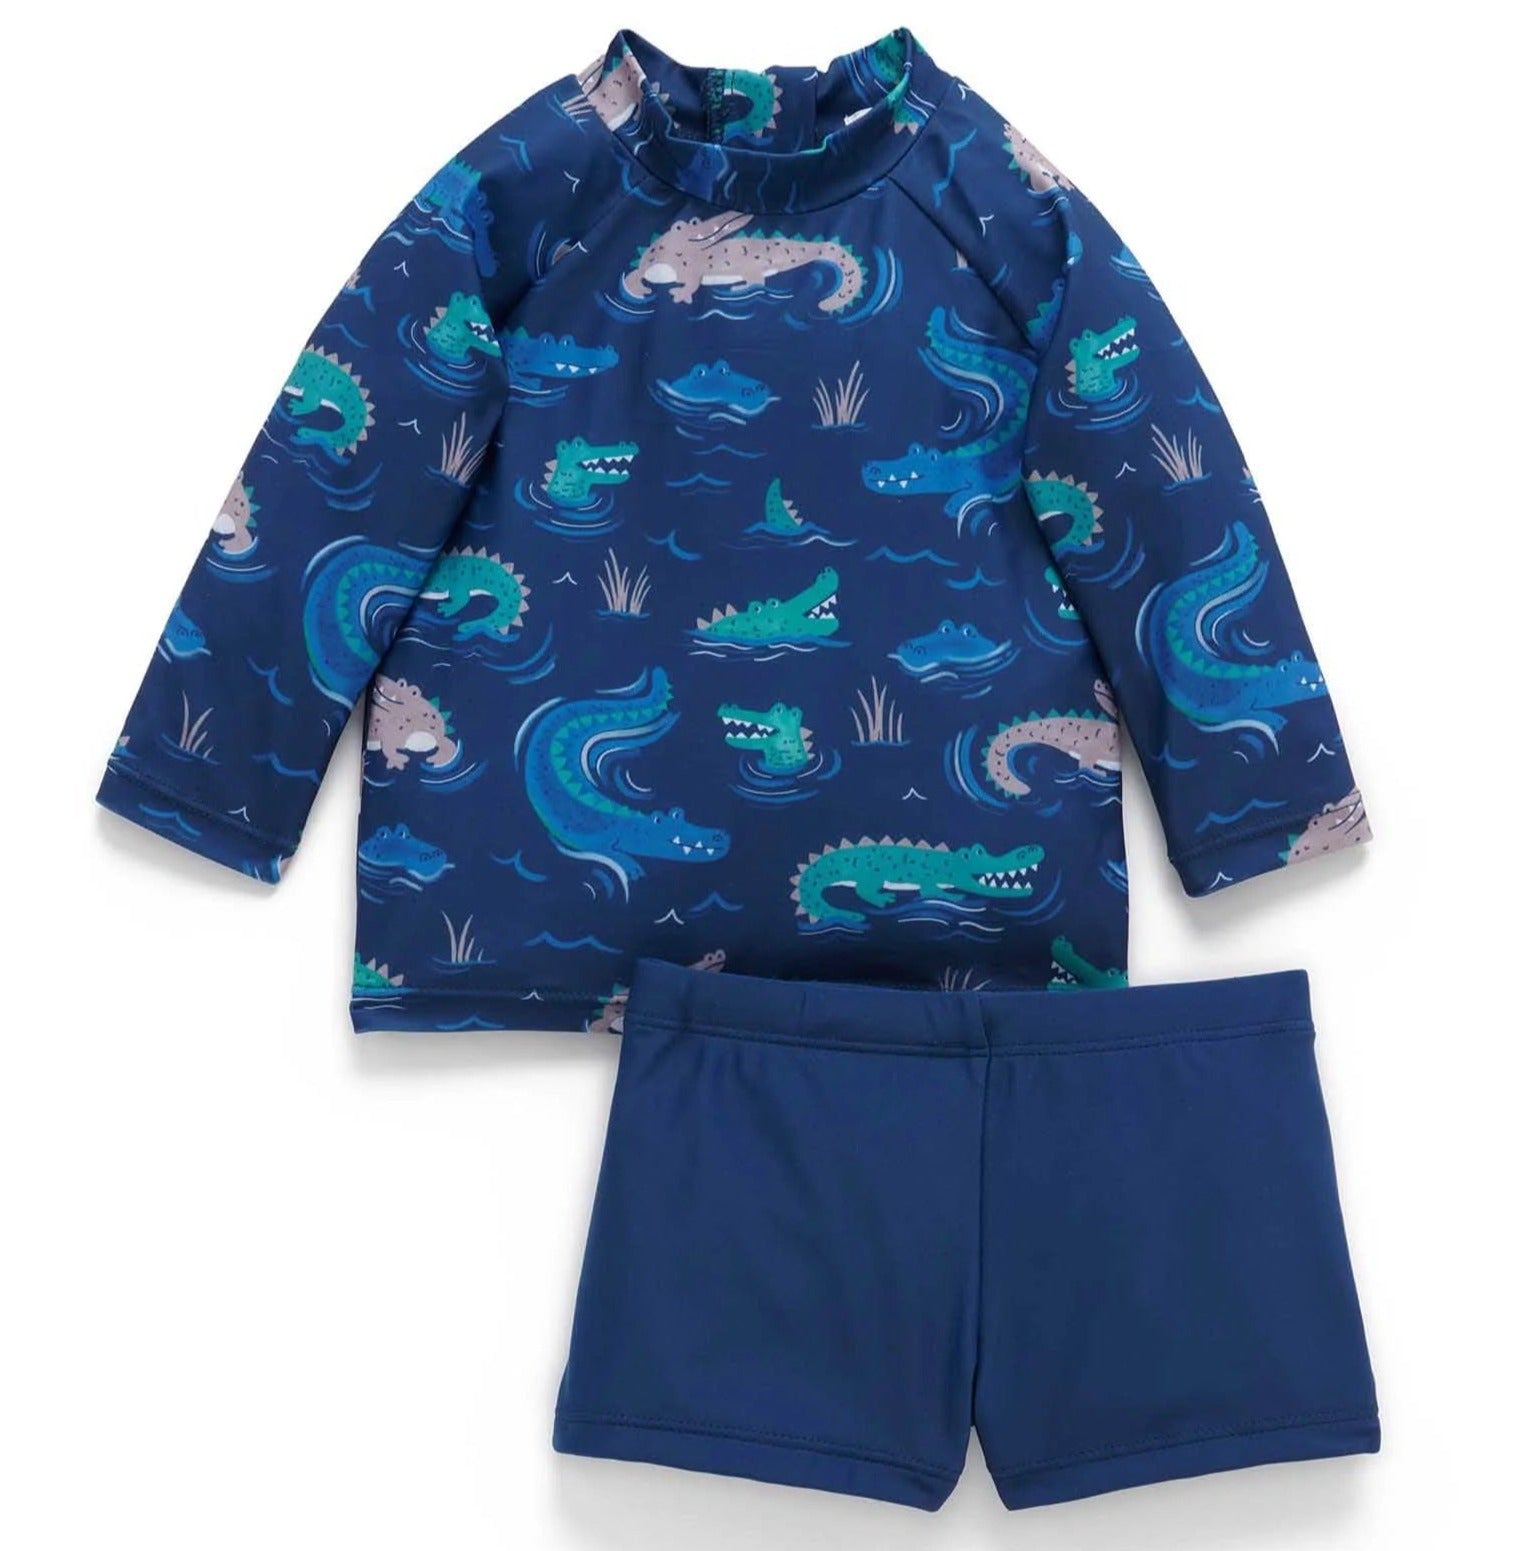 purebaby swimsuit - angus and dudley